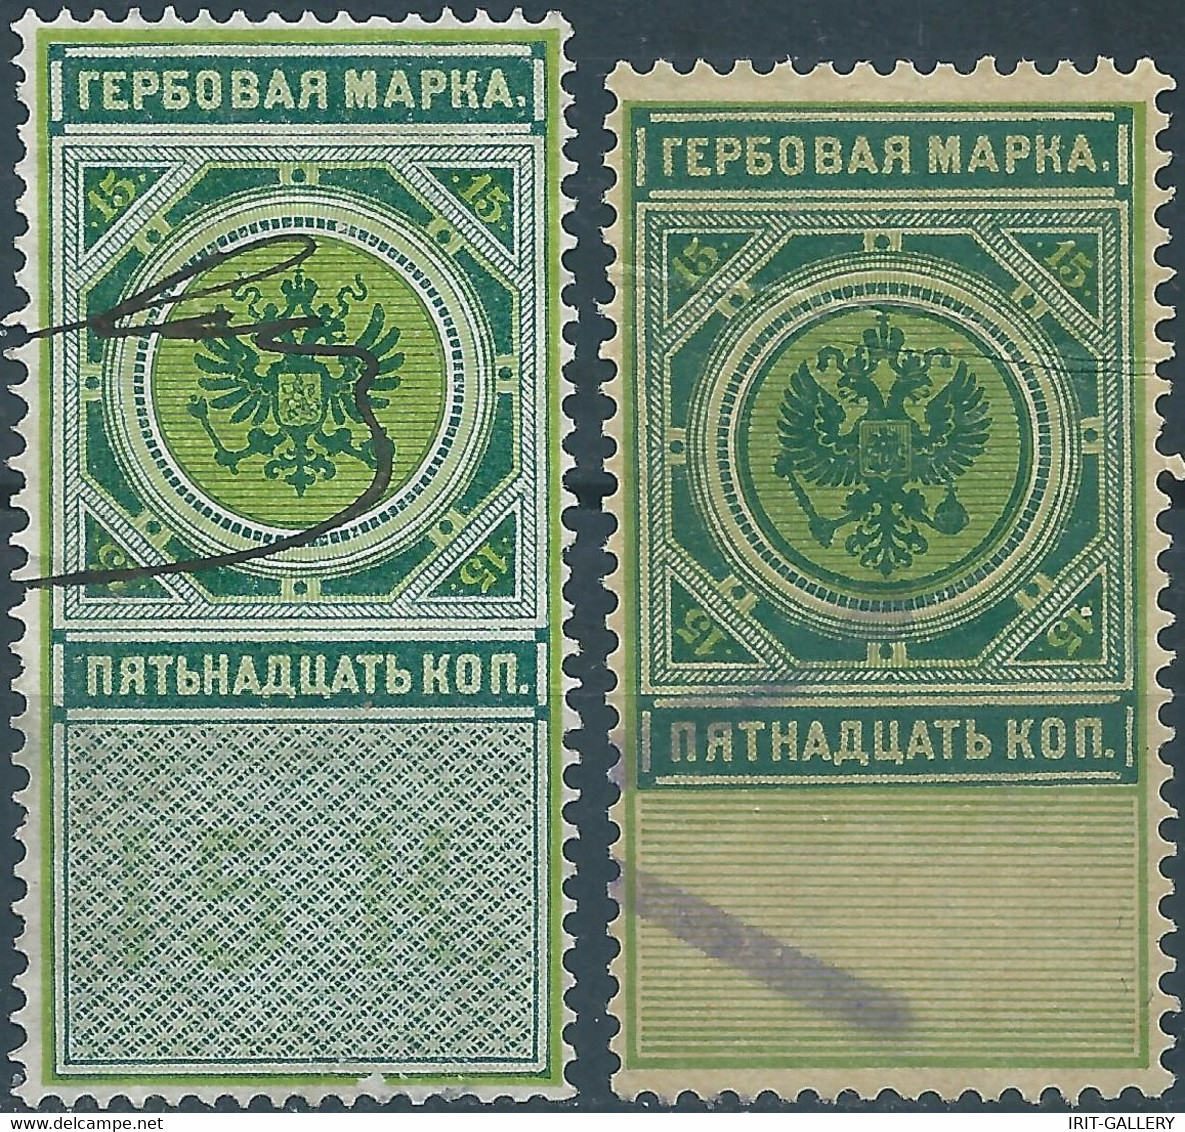 Russia - Russie - Russland,1886-1890 Revenue Stamps Fiscal Tax 15kop,1st And 2nd Issue, Different In Size And Color,used - Fiscaux